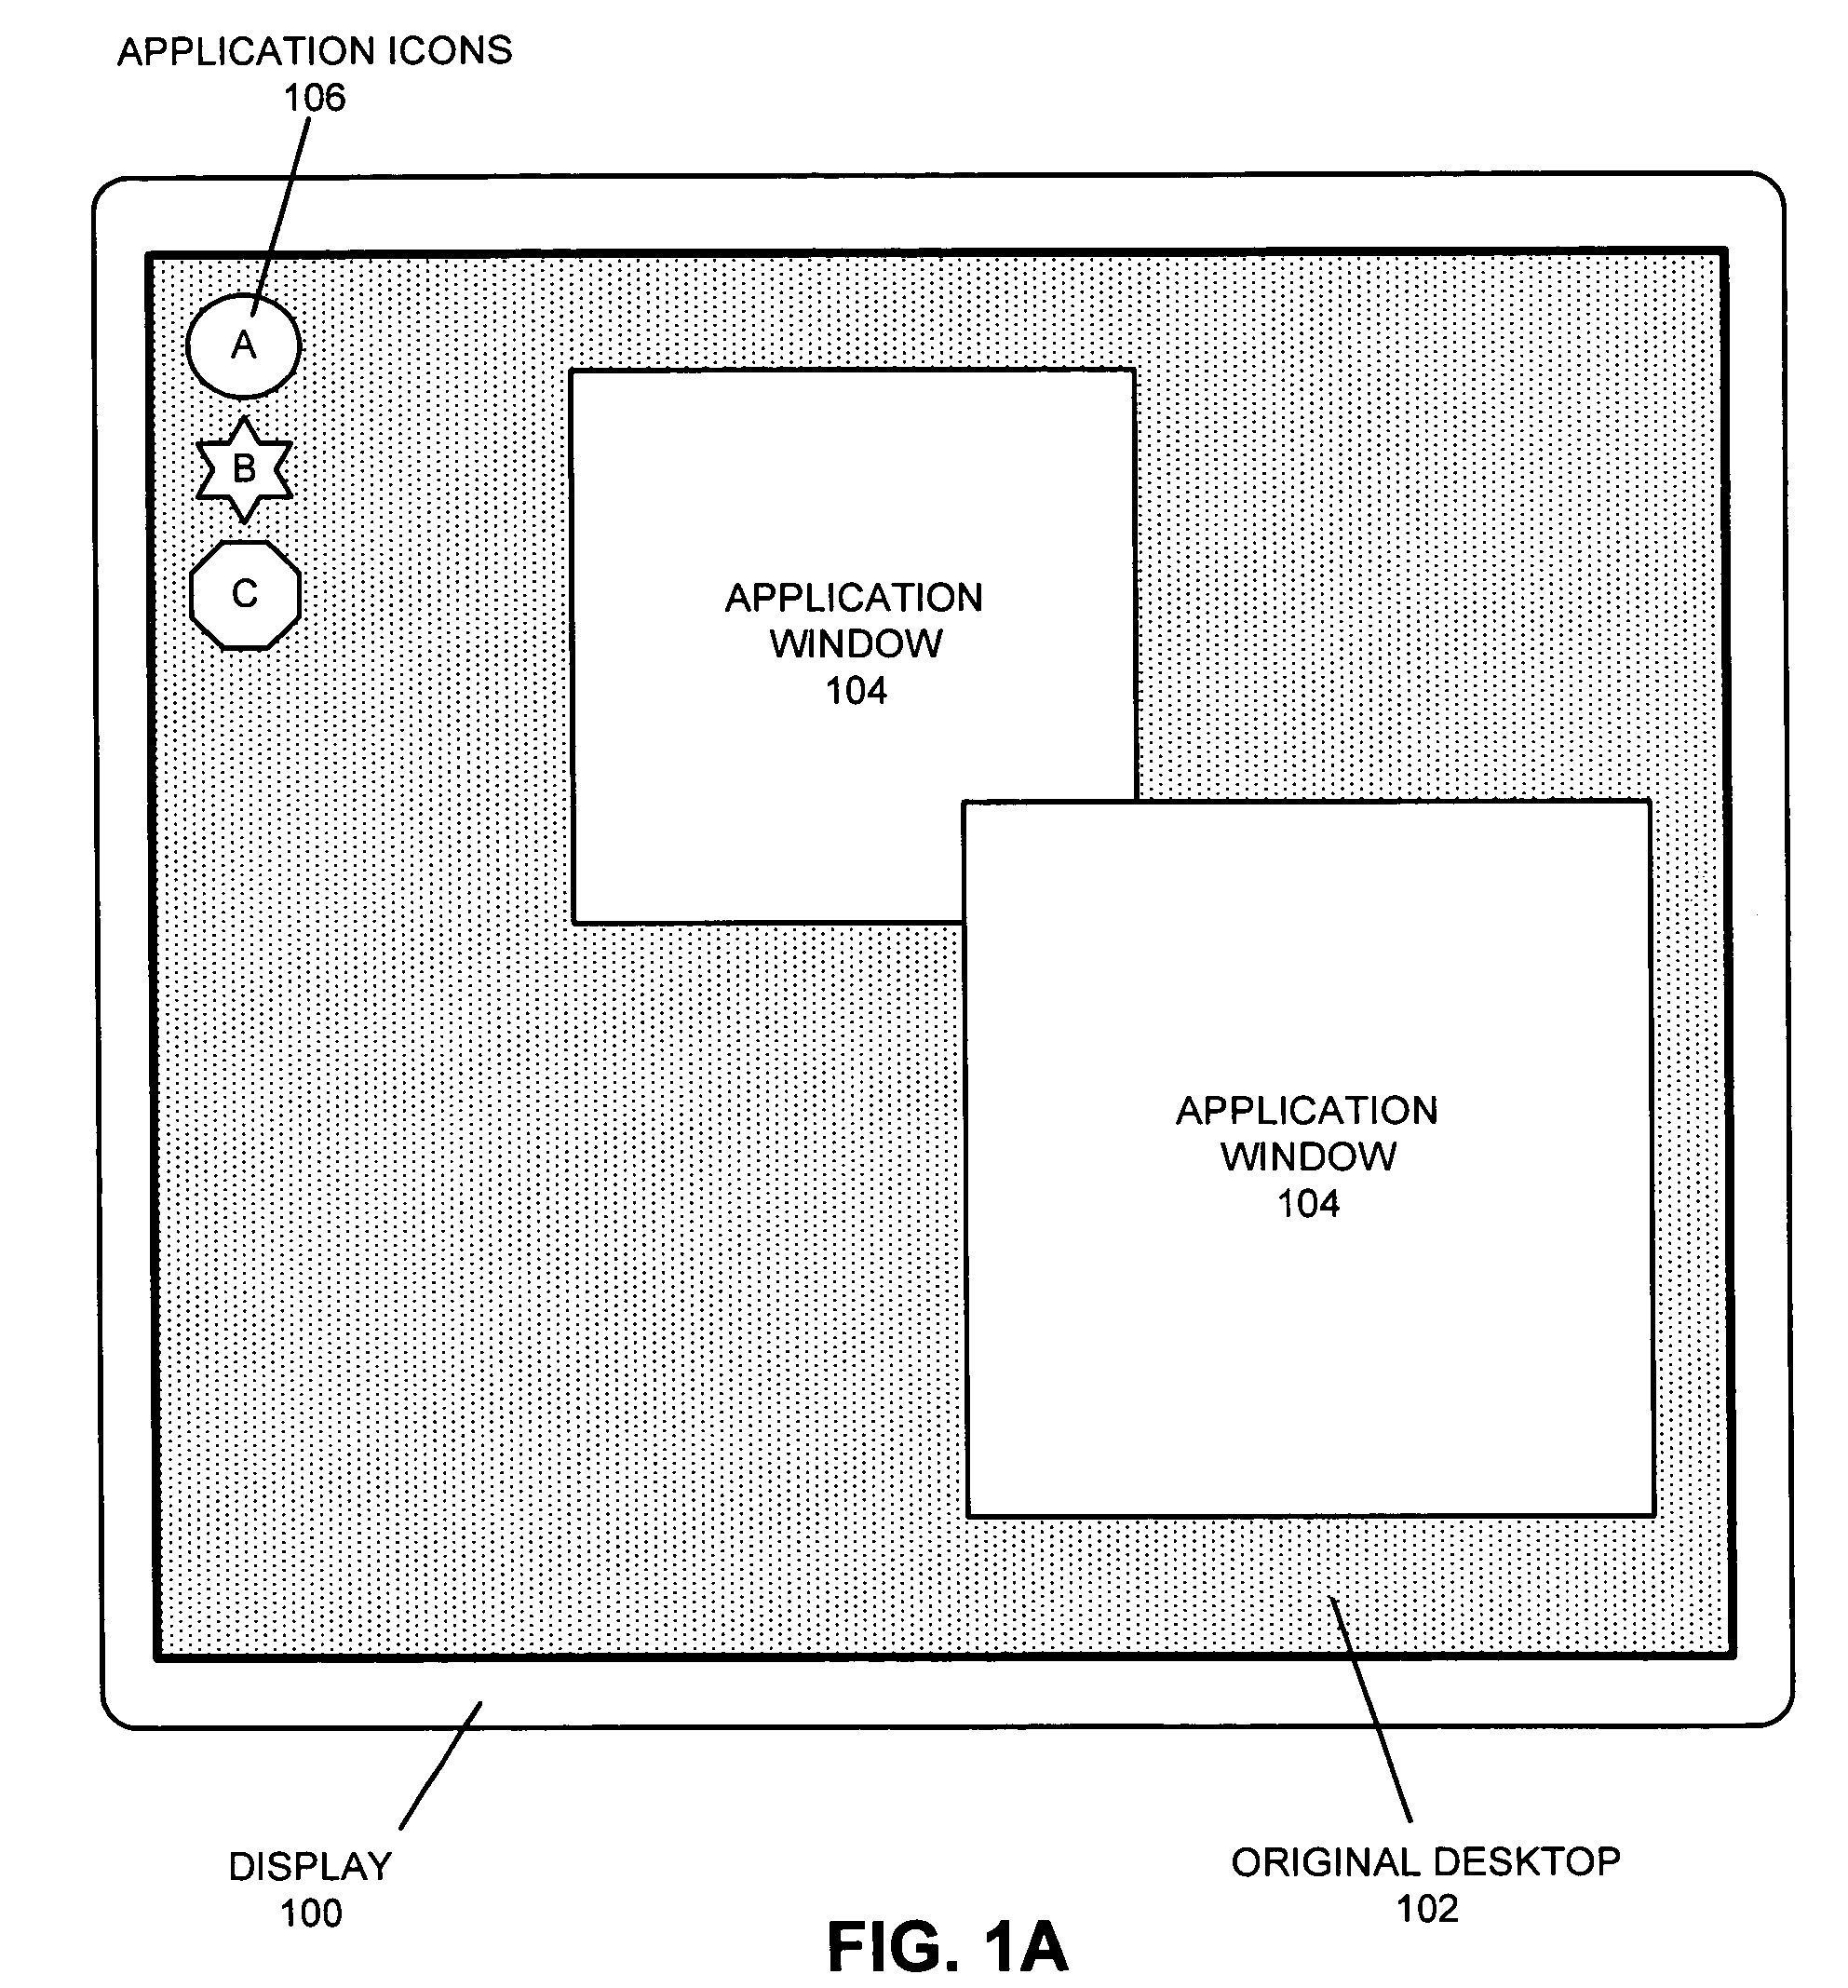 Using a zooming effect to provide additional display space for managing applications